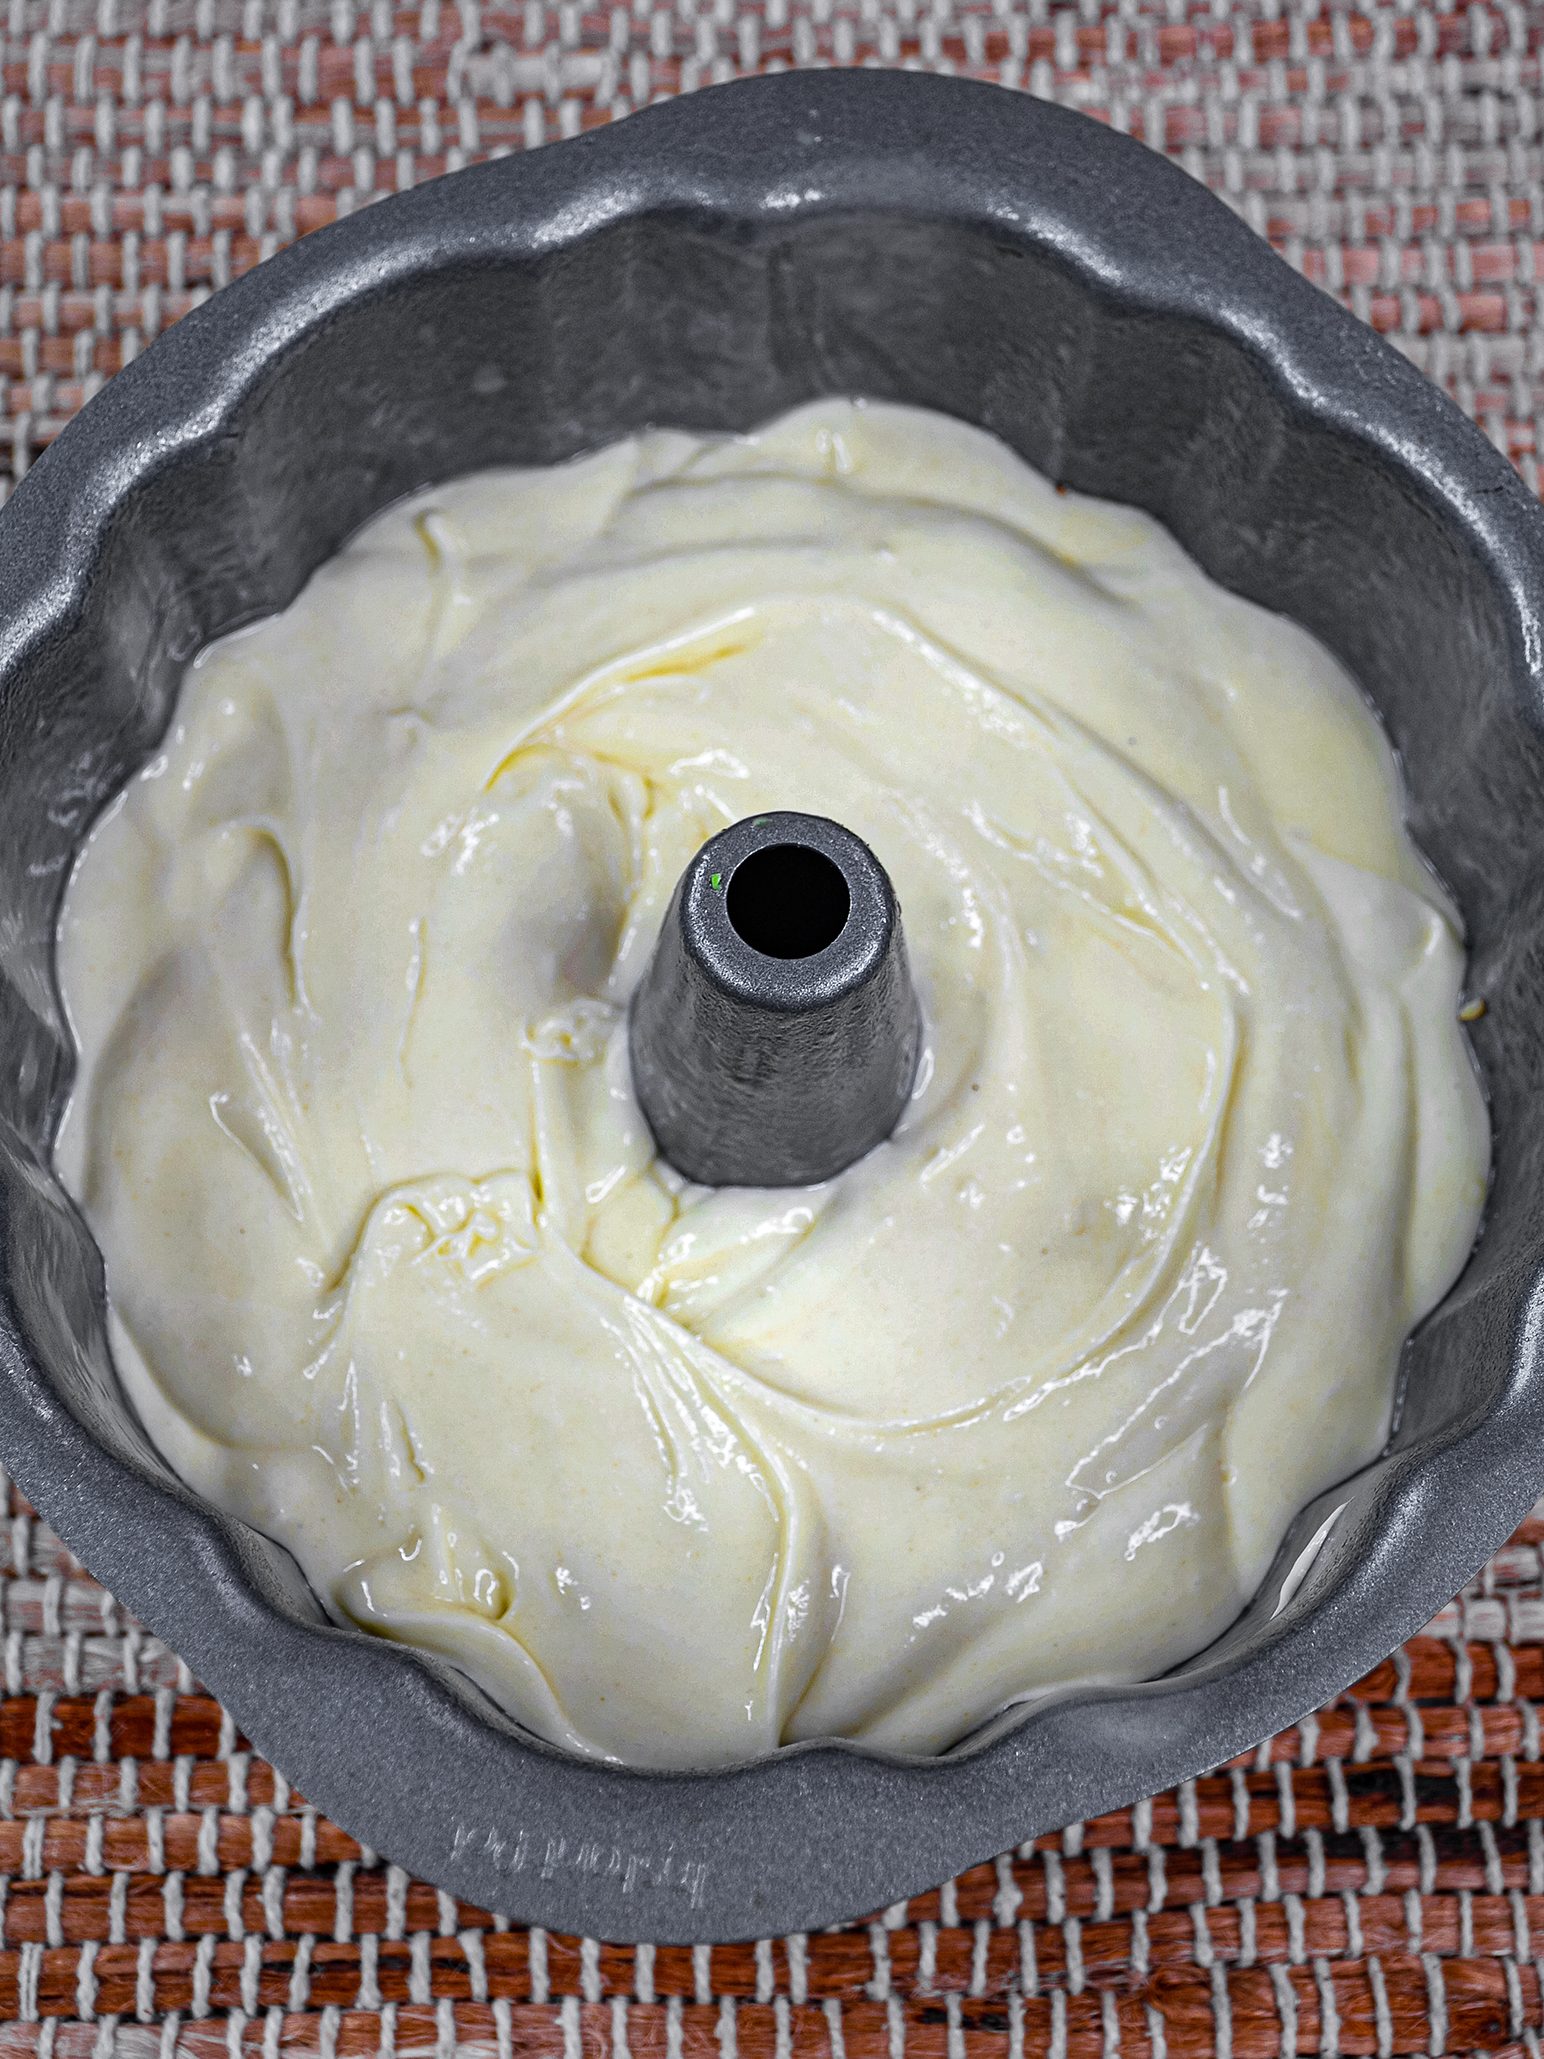 Pour the cake batter in the bundt cake pan.